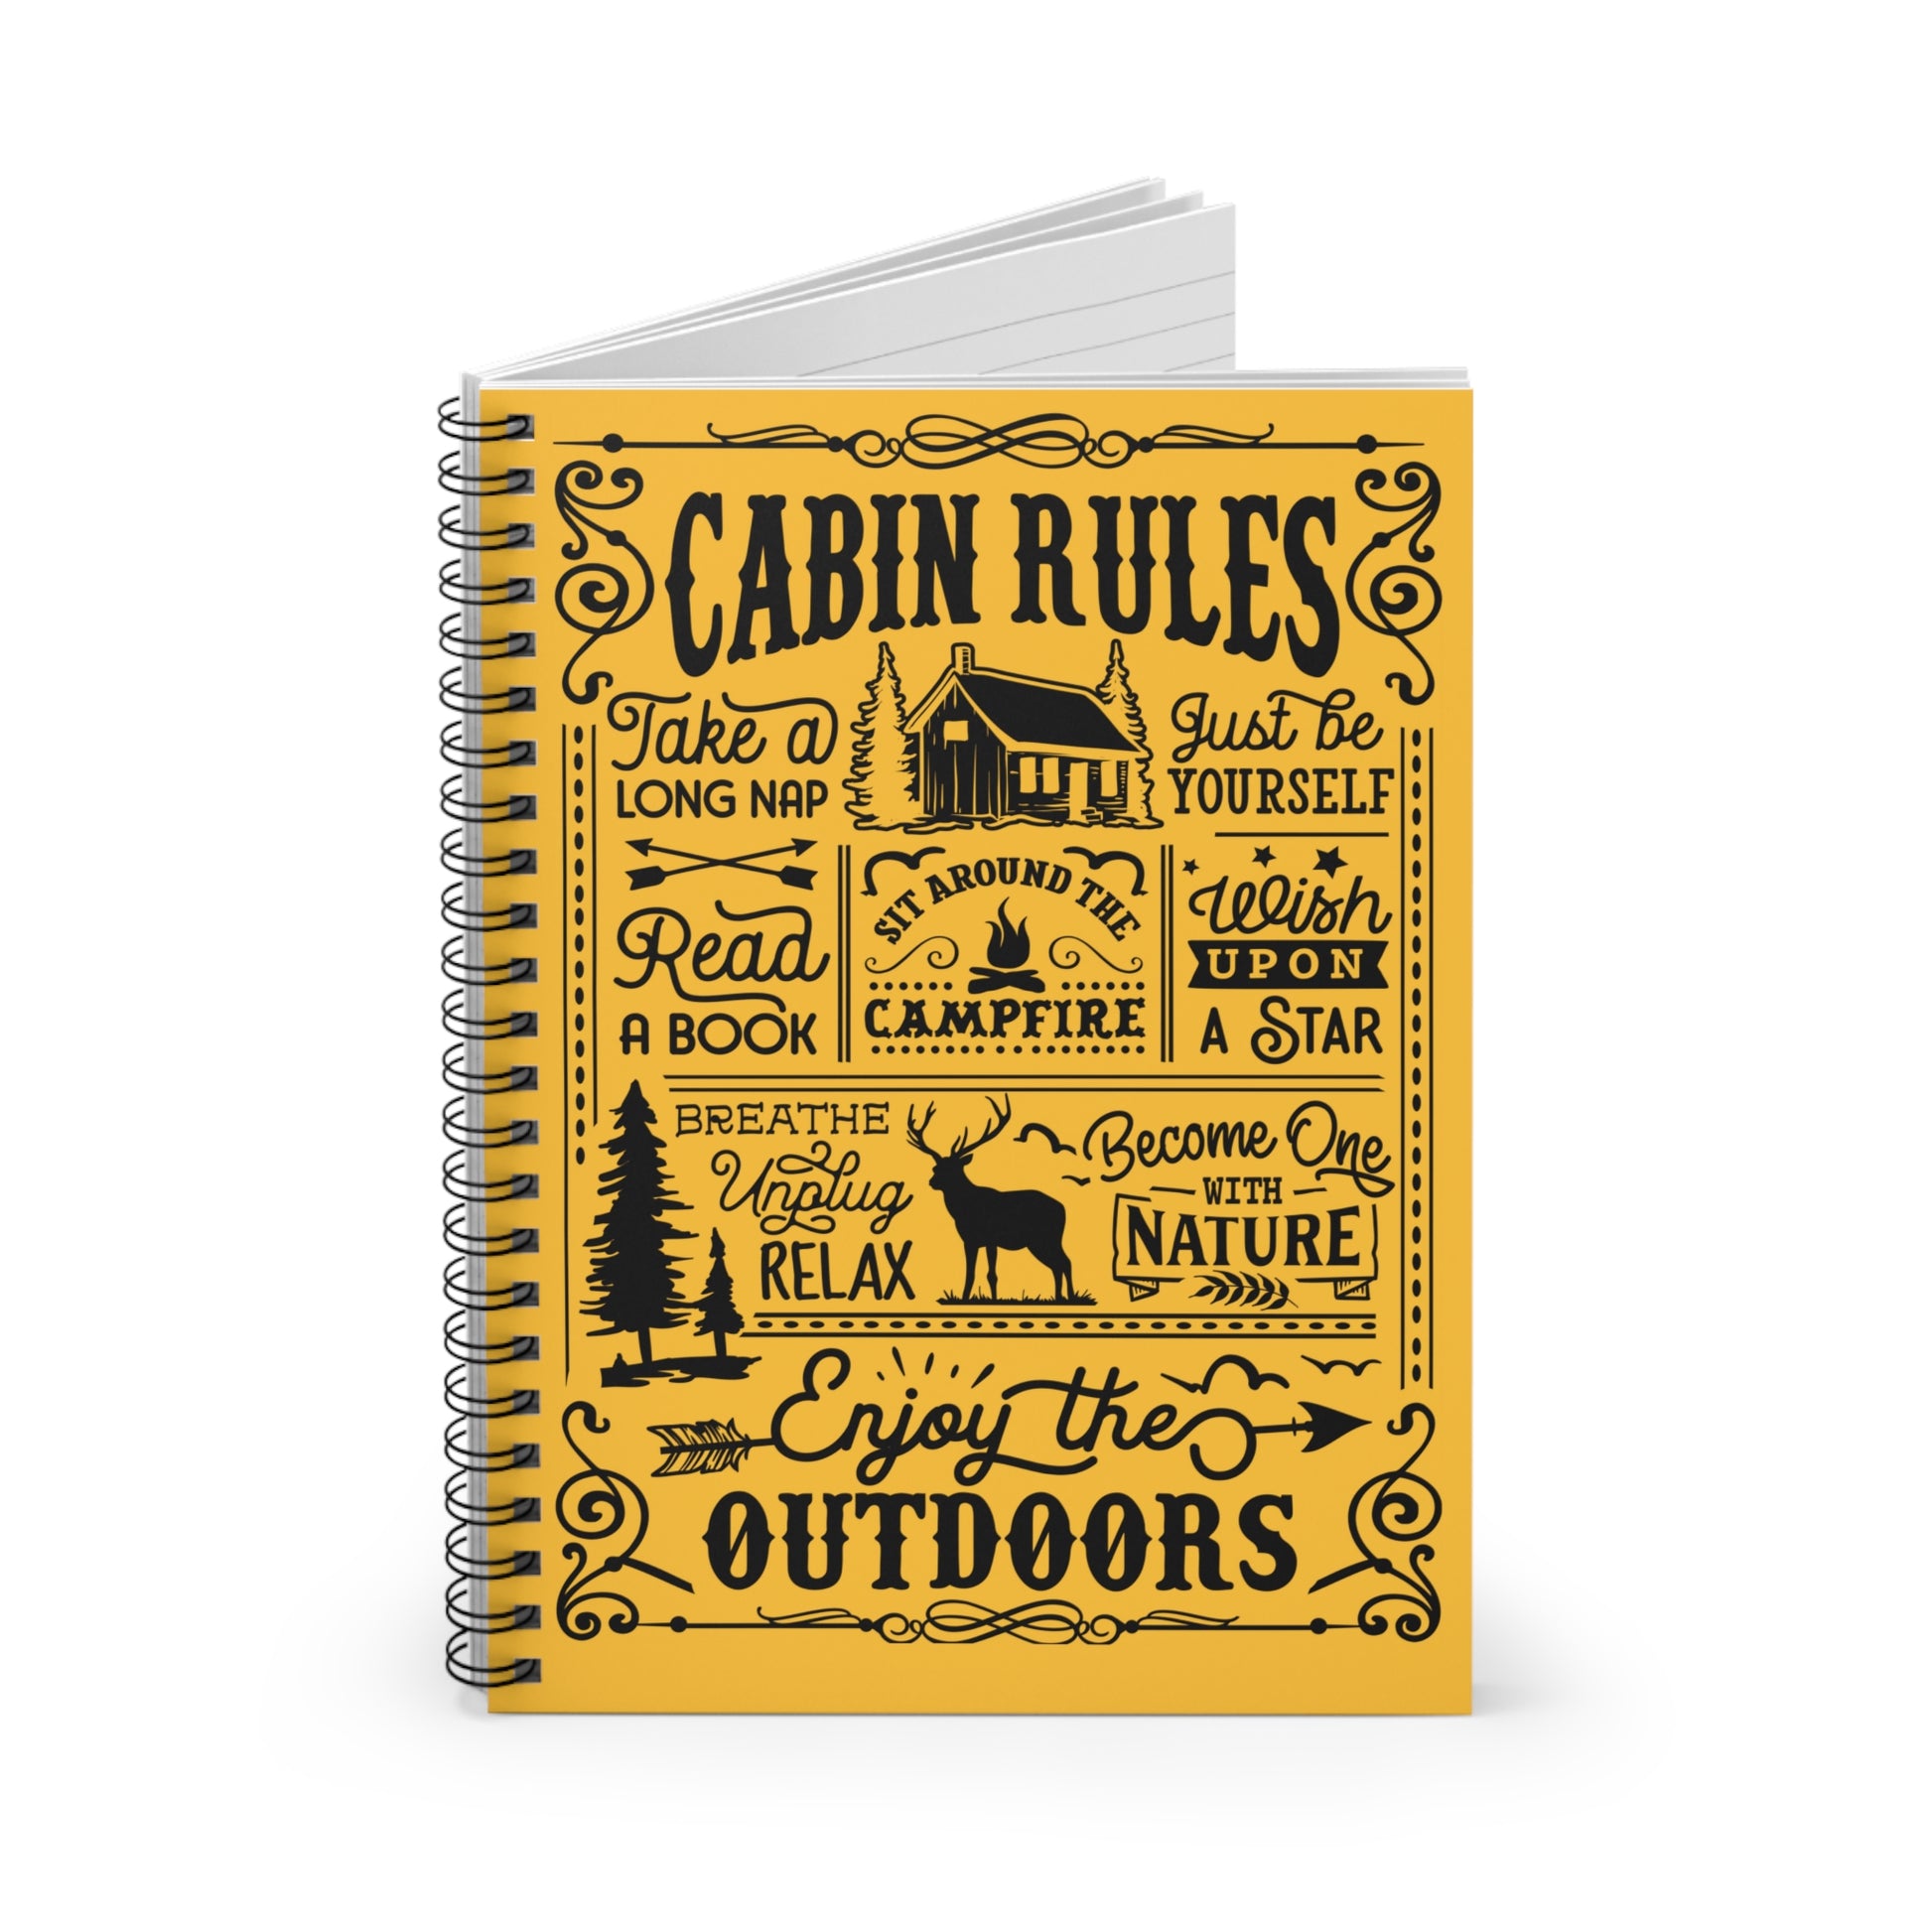 Cabin Rules: Spiral Notebook - Log Books - Journals - Diaries - and More Custom Printed by TheGlassyLass.com